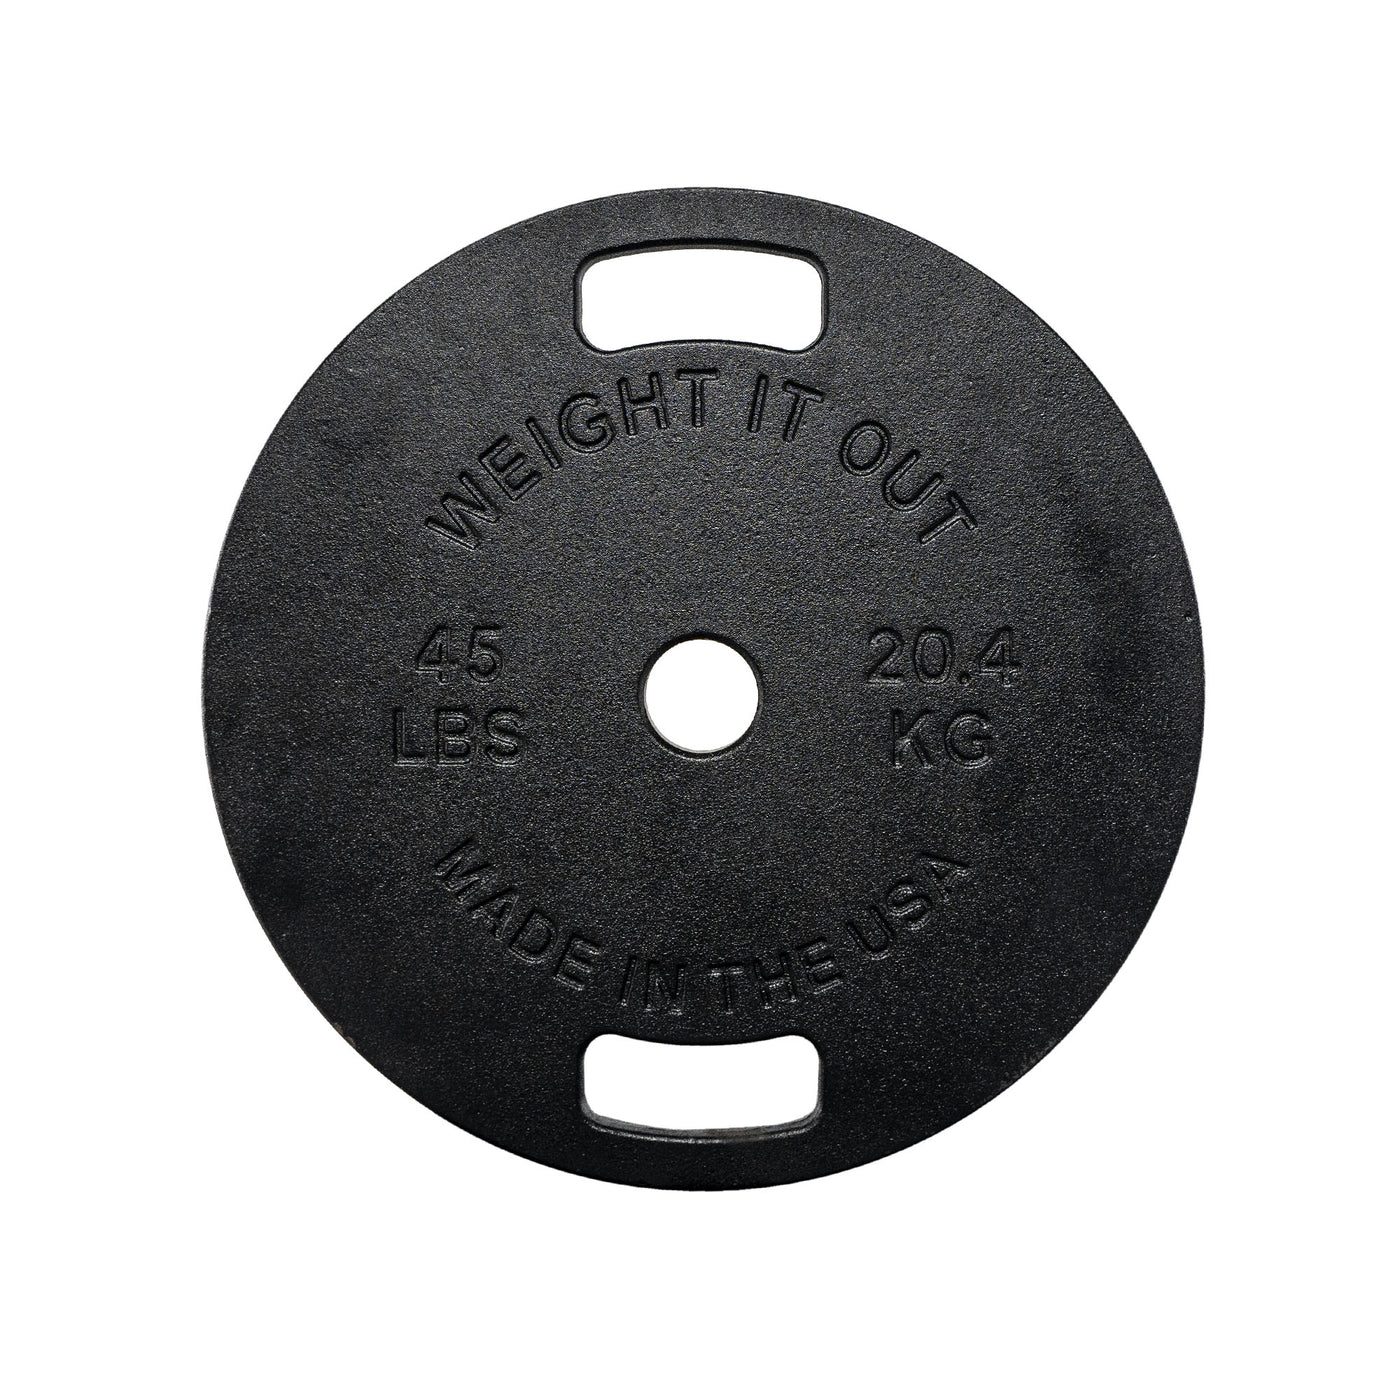 45 LBs Machined Cast Iron Weight Plate Pair (Free Shipping!)